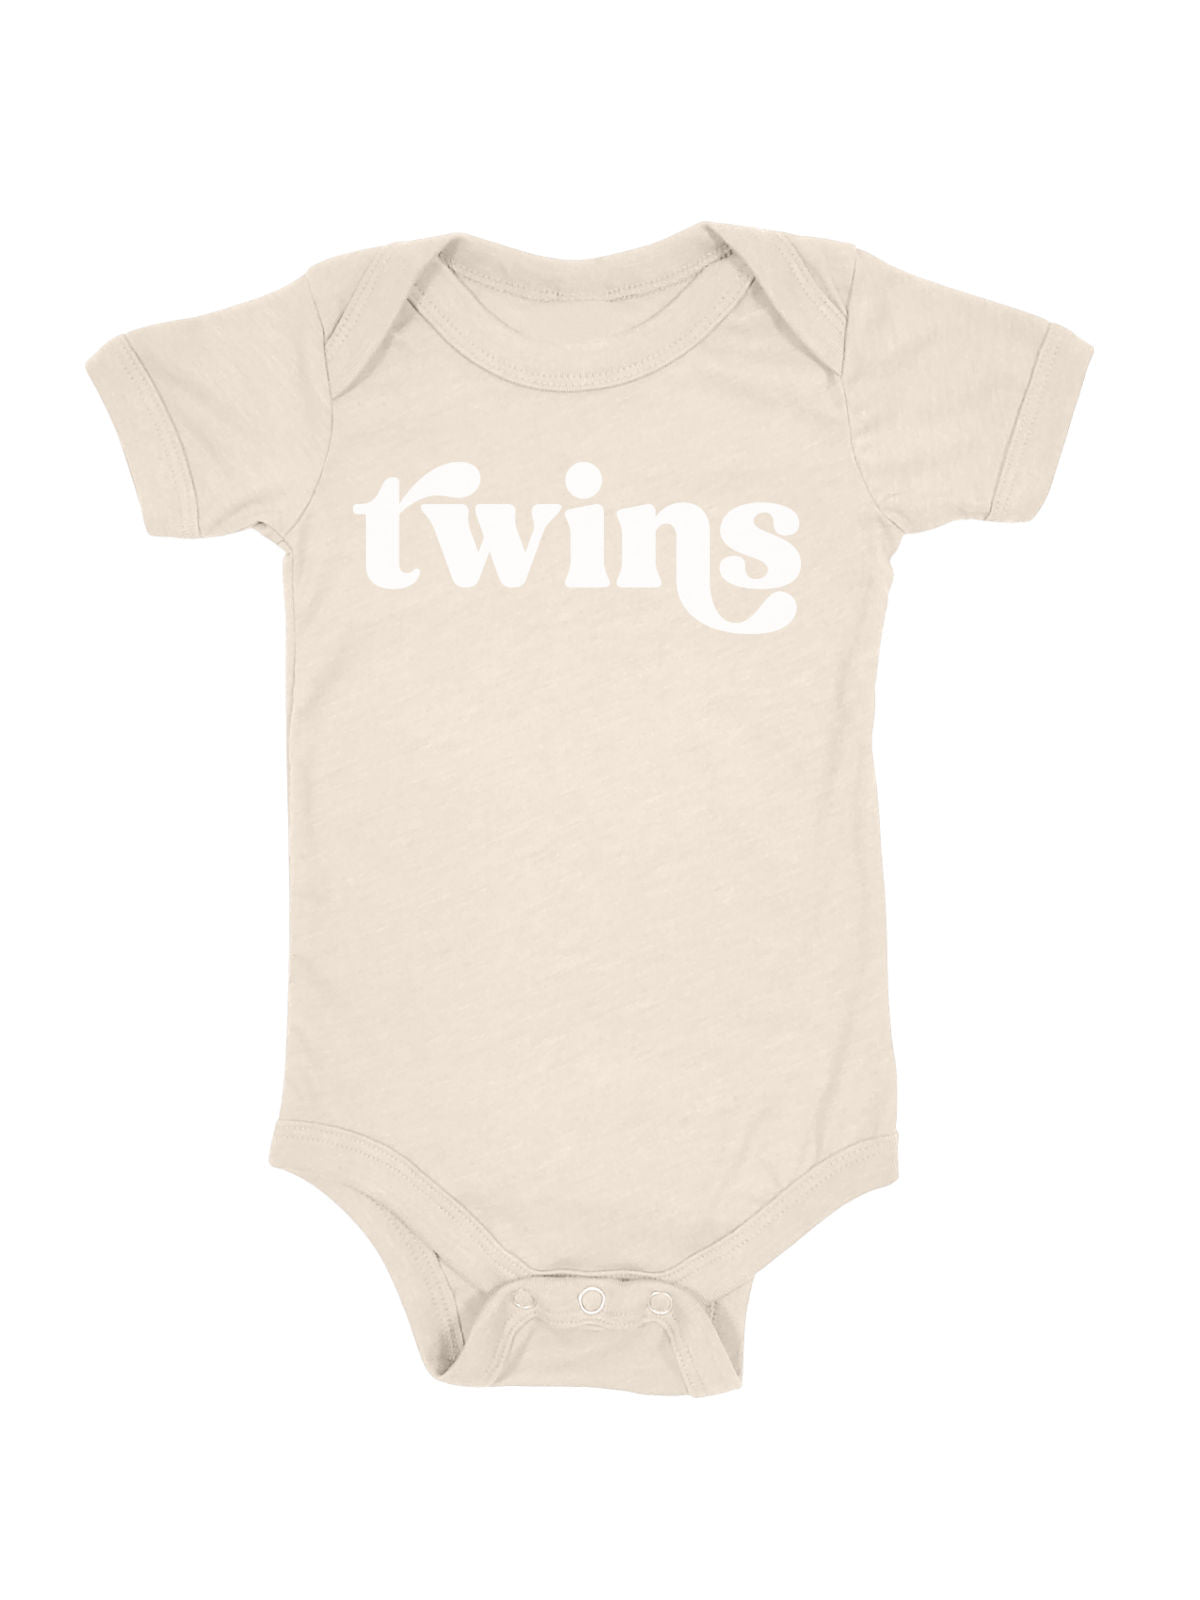 Twins Baby Bodysuit in Natural